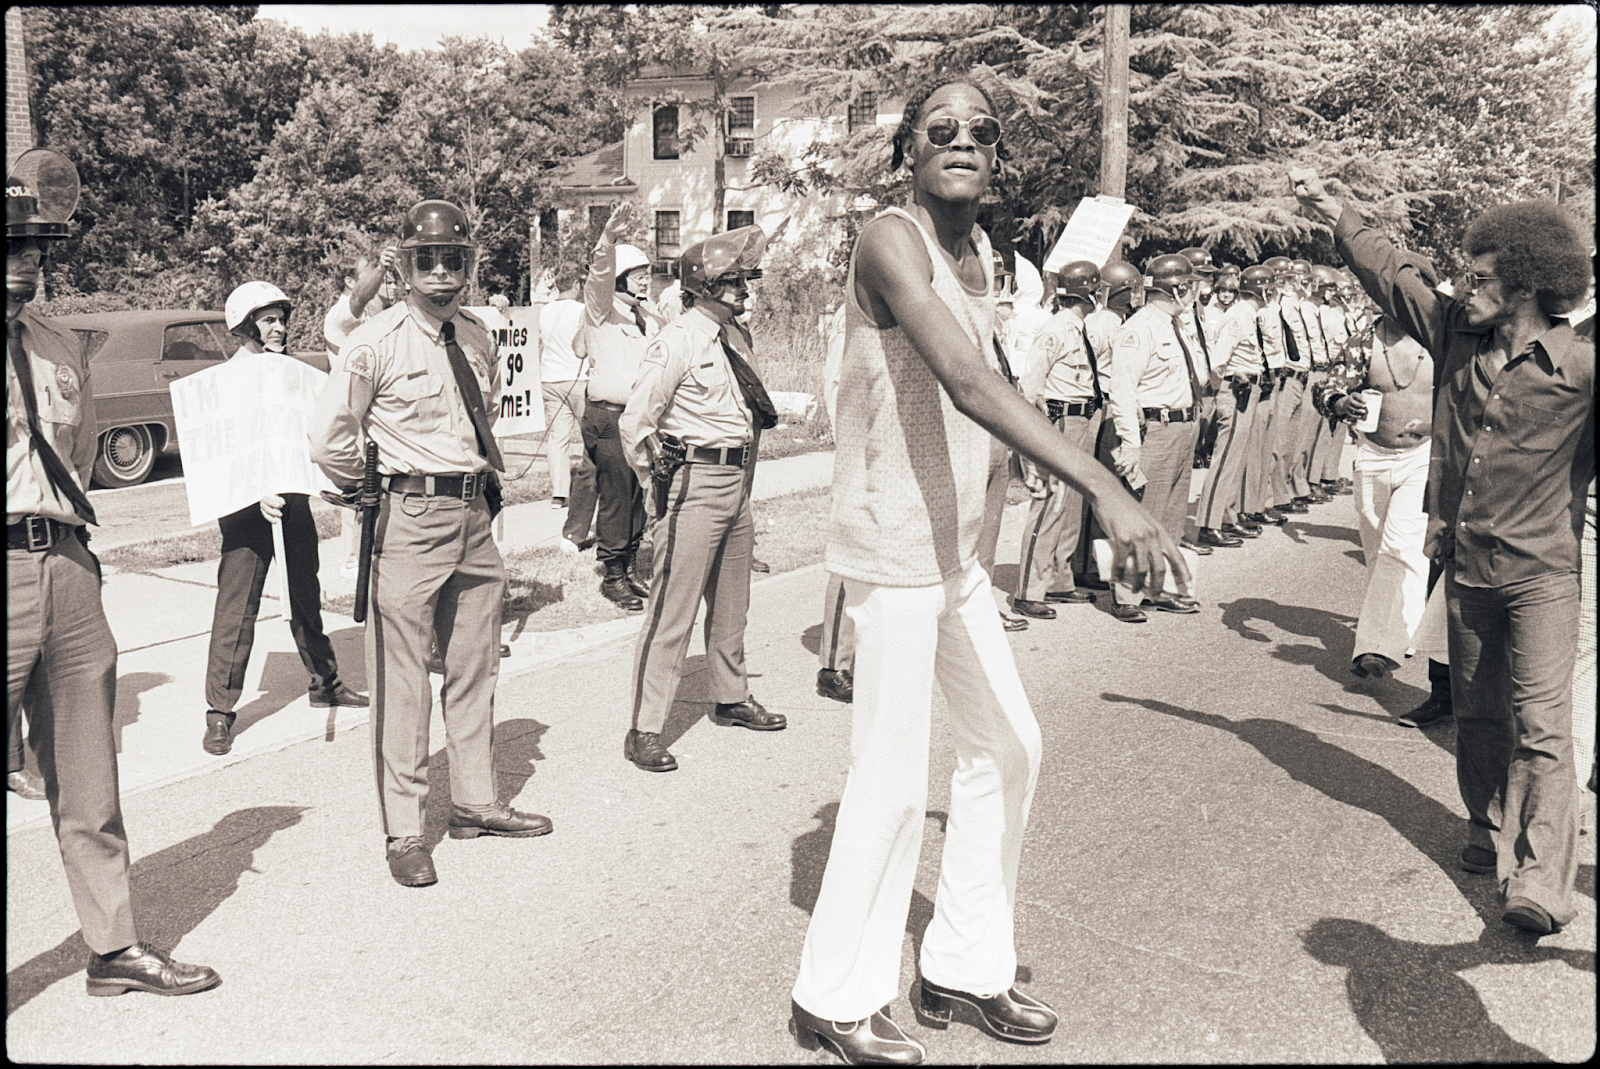 Protestors and police at protest against the death penalty, 1974.